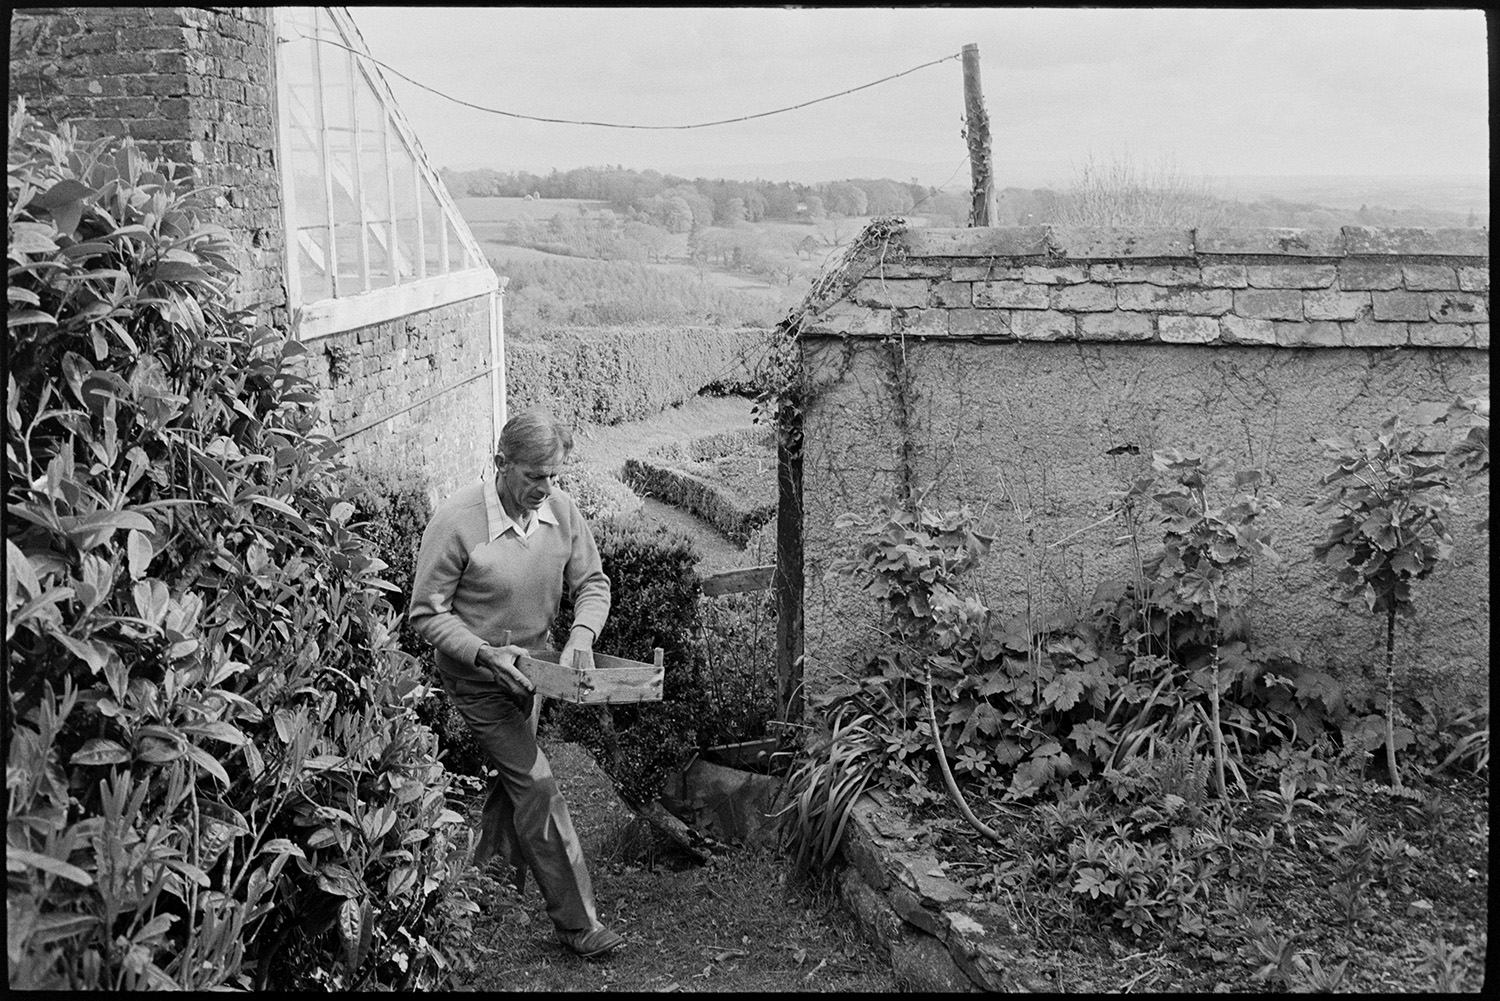 Man planting spring vegetables in walled garden, view of distant hills, Dartmoor. 
[A man carrying a tray of seeds to plant in the walled garden at The Old Rectory, Merton. A greenhouse can be seen in the background, and fields and trees in the distance.]